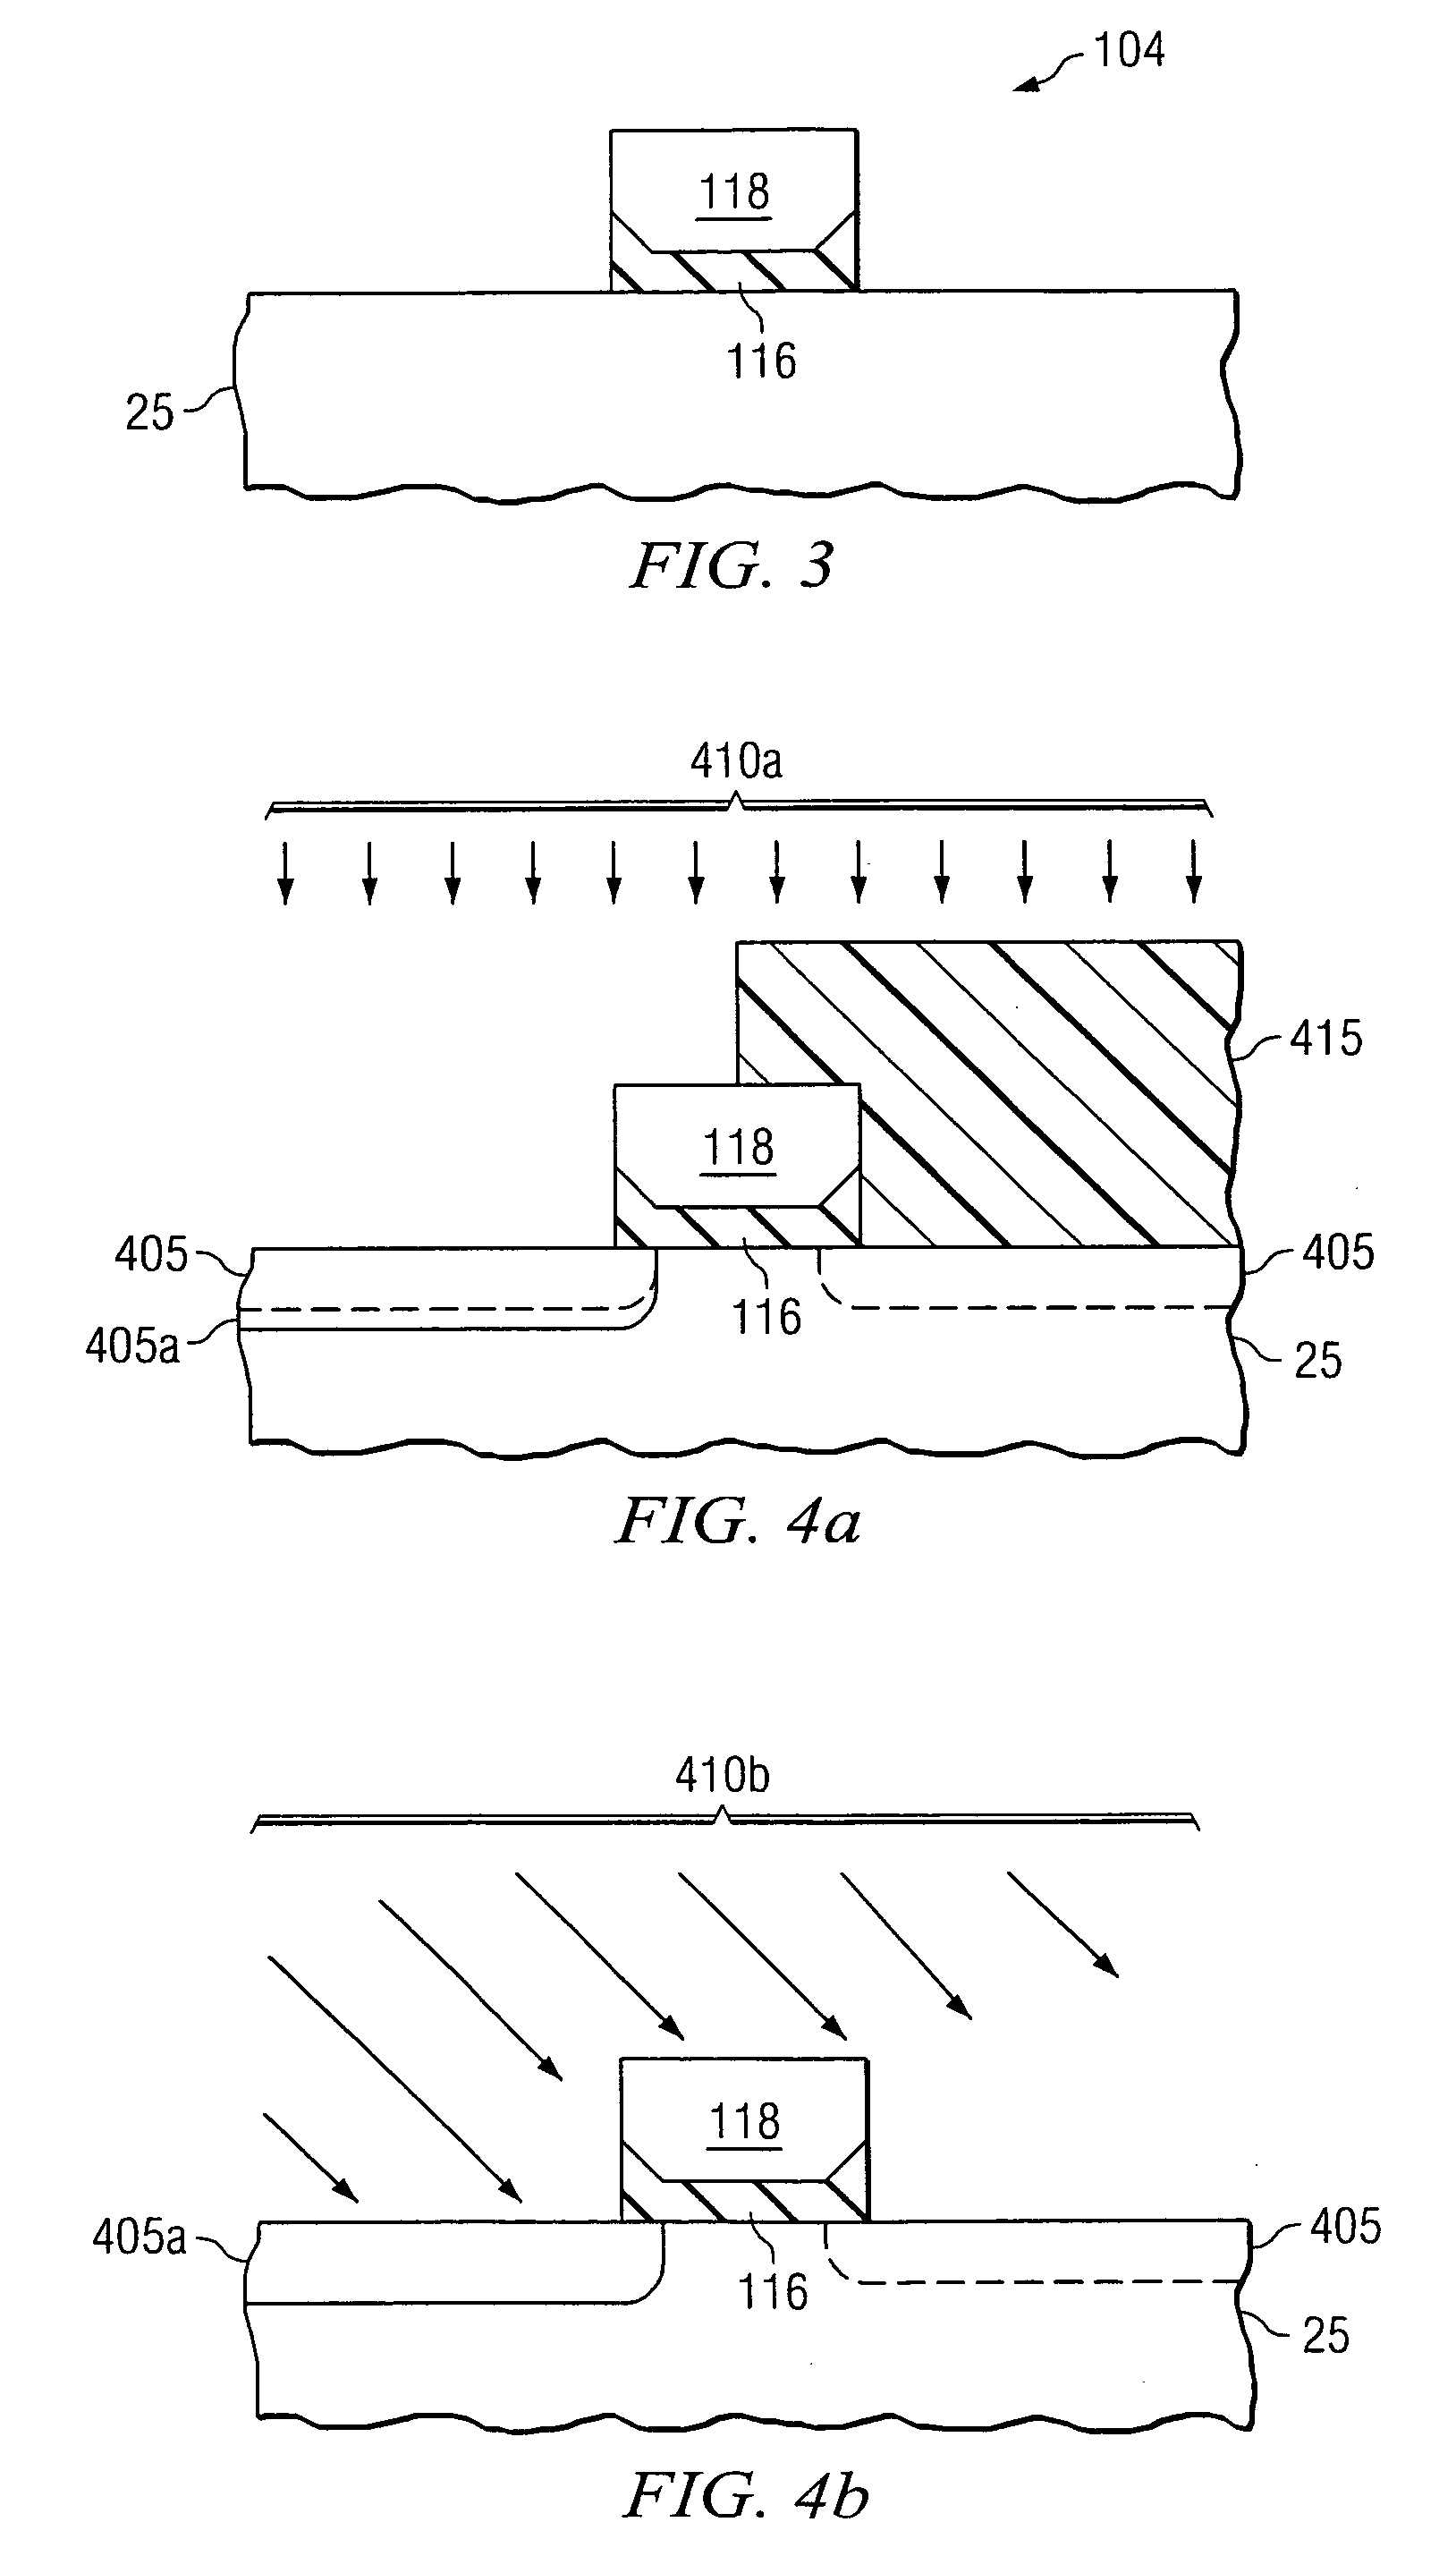 CMOS devices for low power integrated circuits